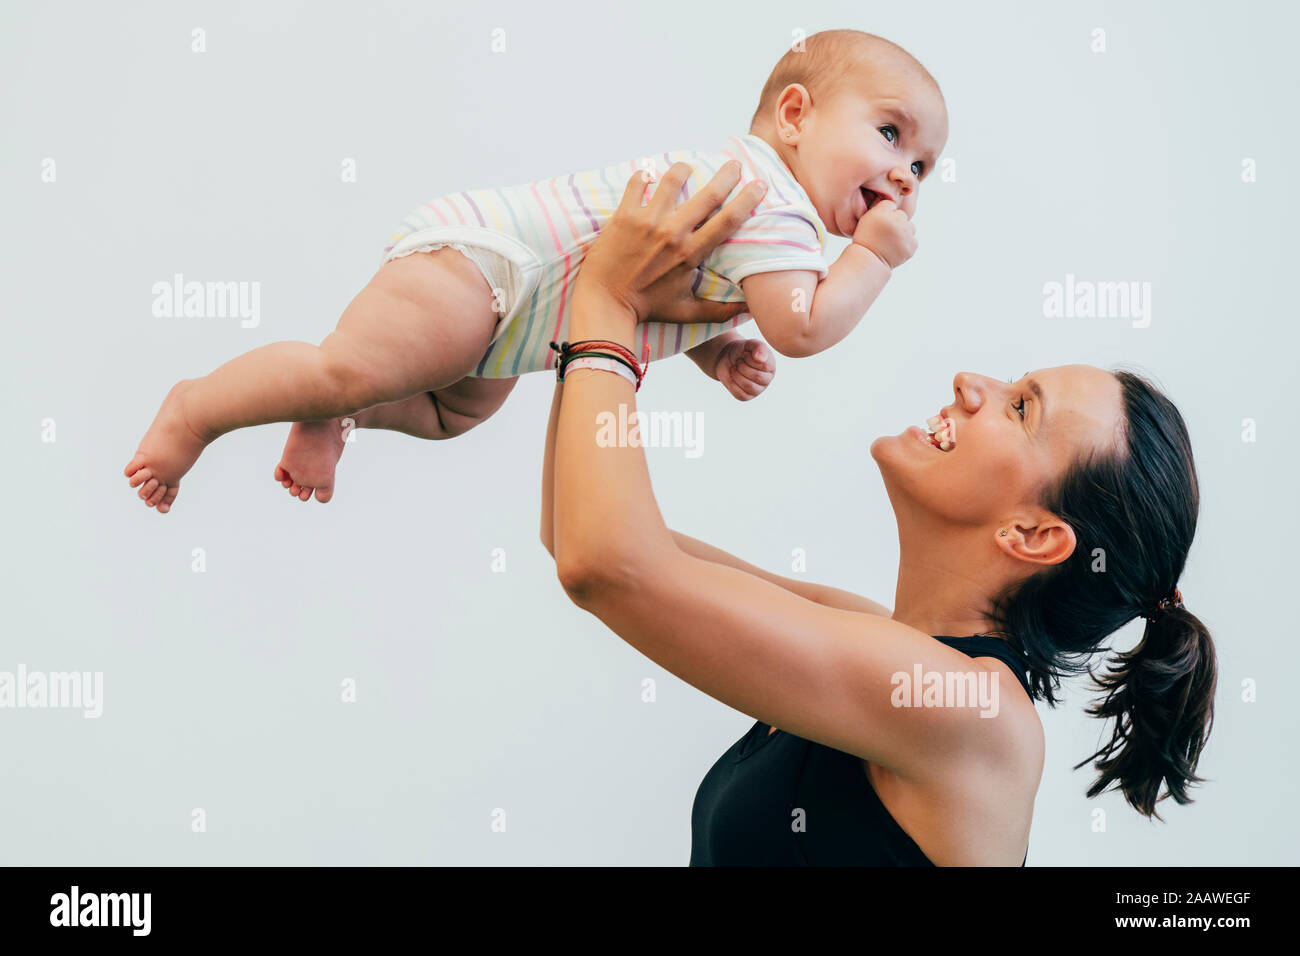 Young mother and baby during mother child gymnastics Stock Photo